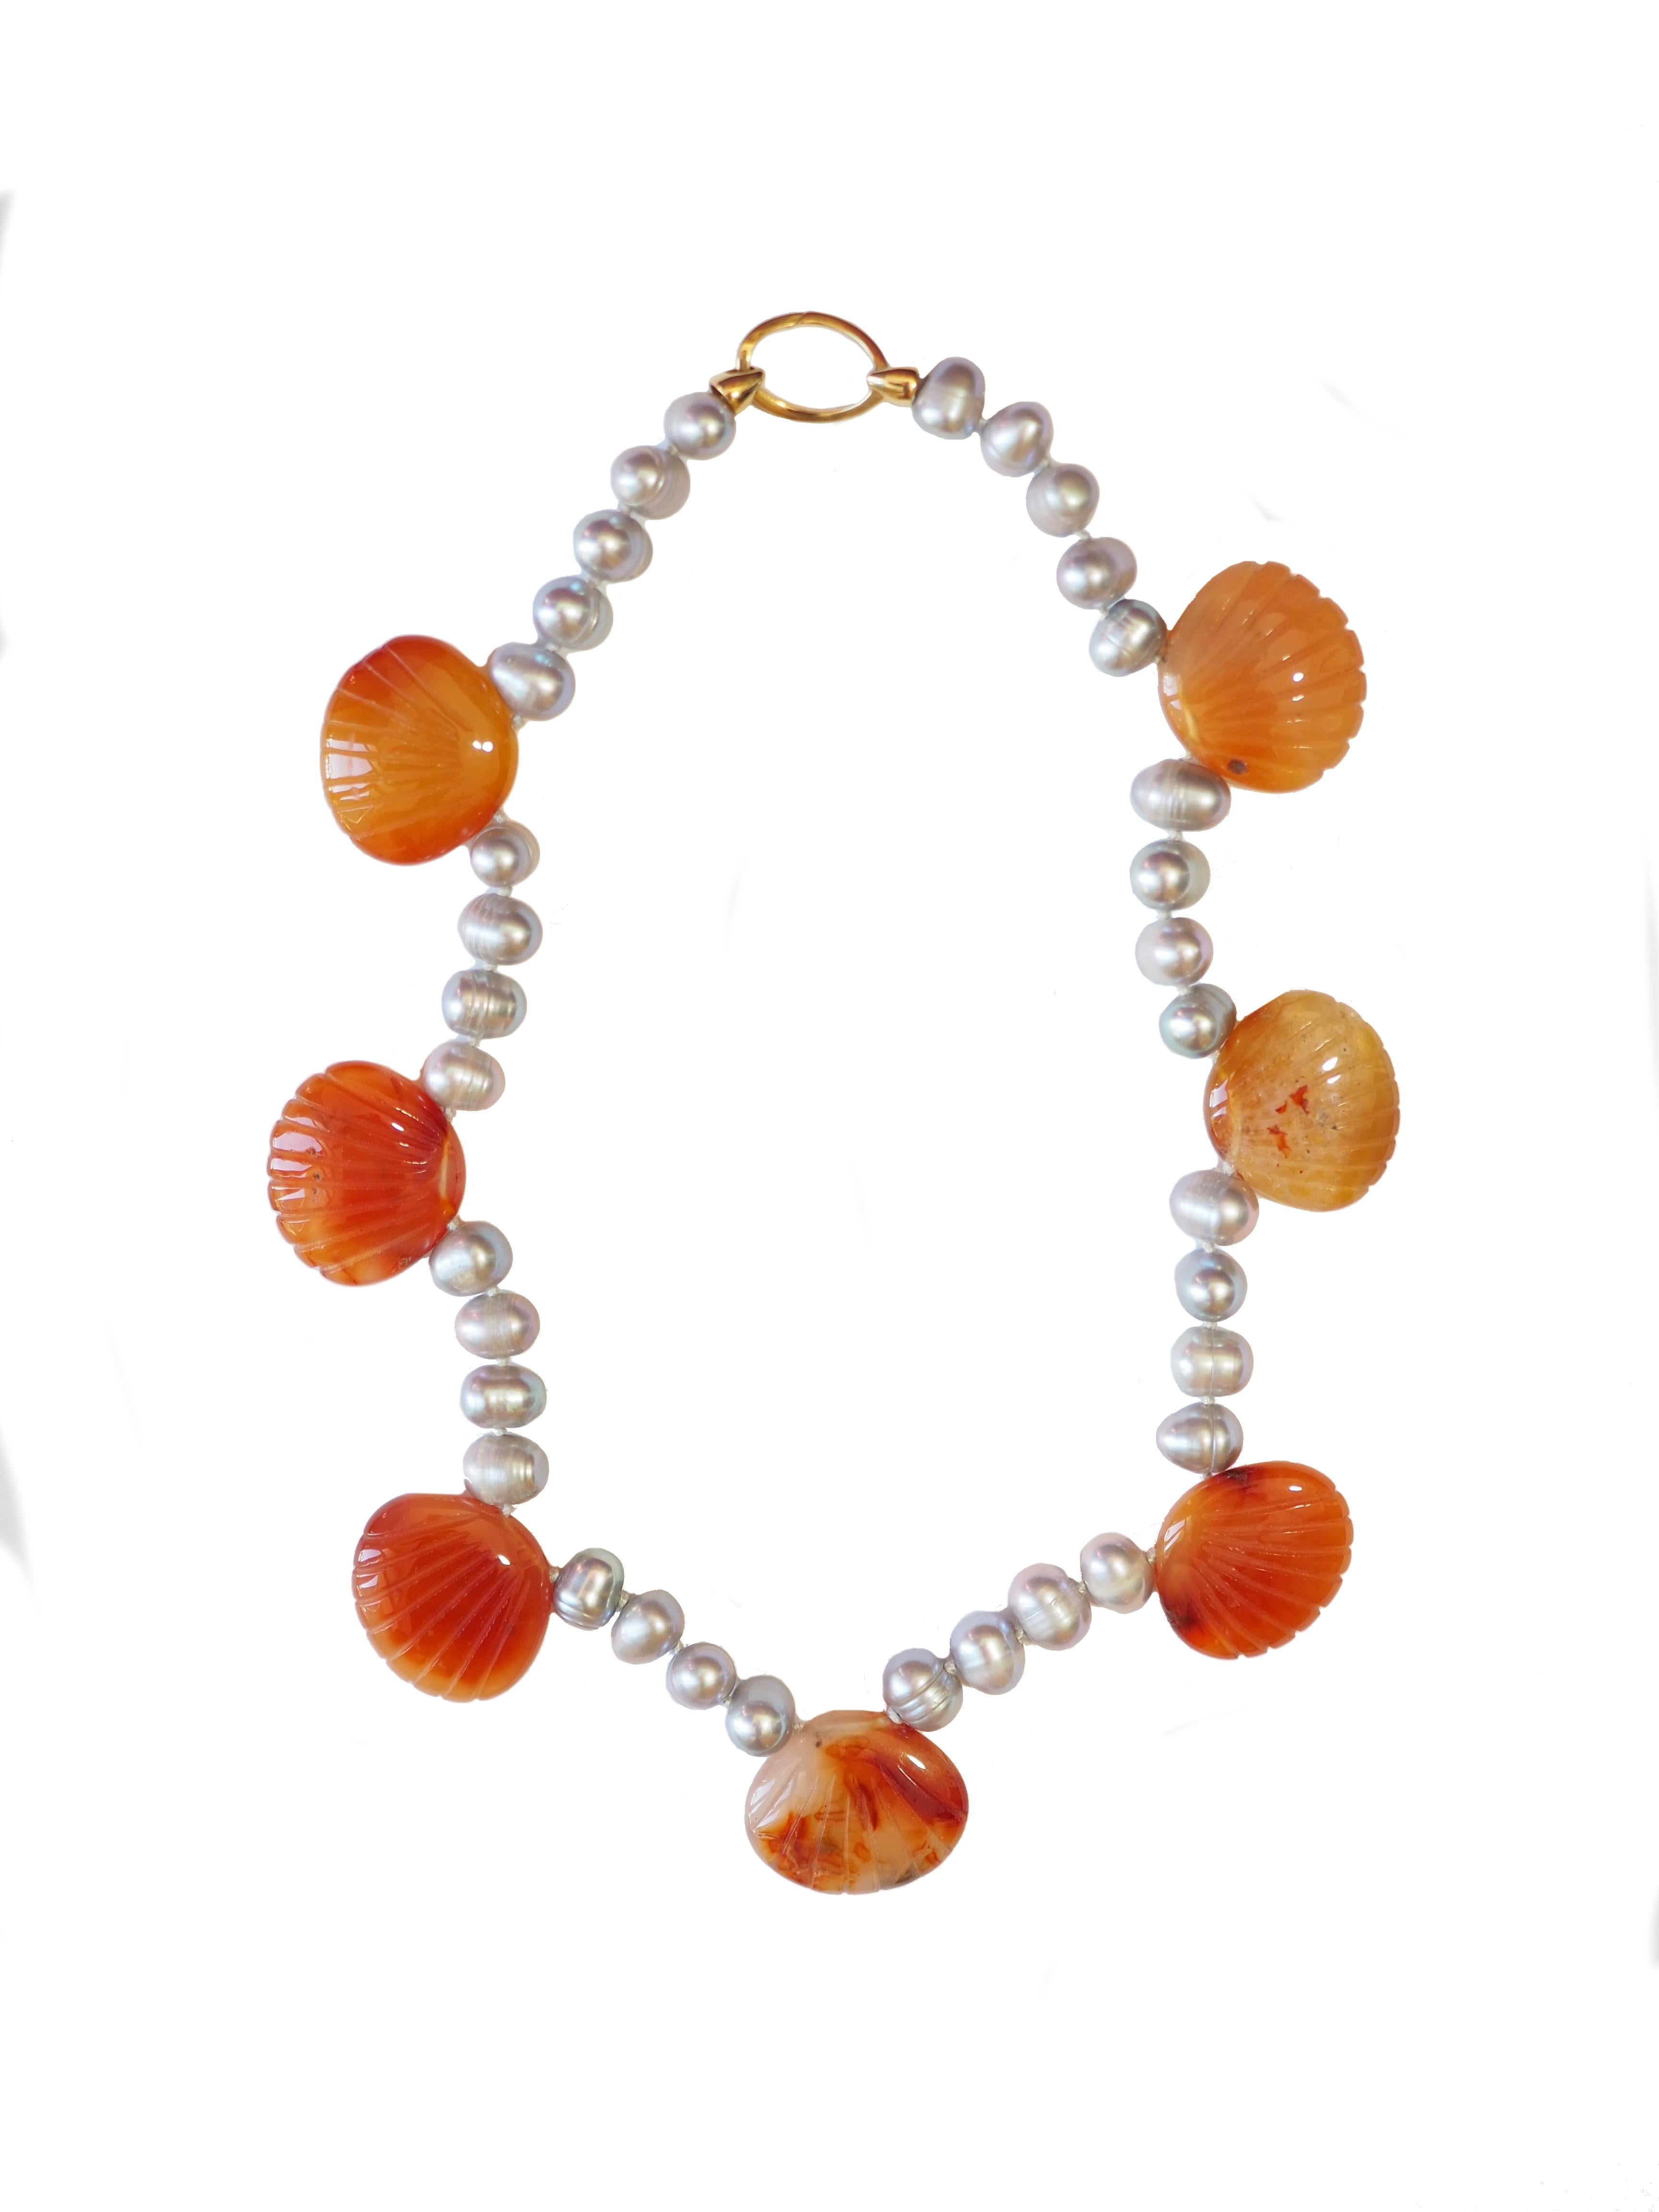 necklace with grey fresh water pearls, carved carnelian shells gold total length 45 cm  weight 114,6 gr.
Unique pieces .